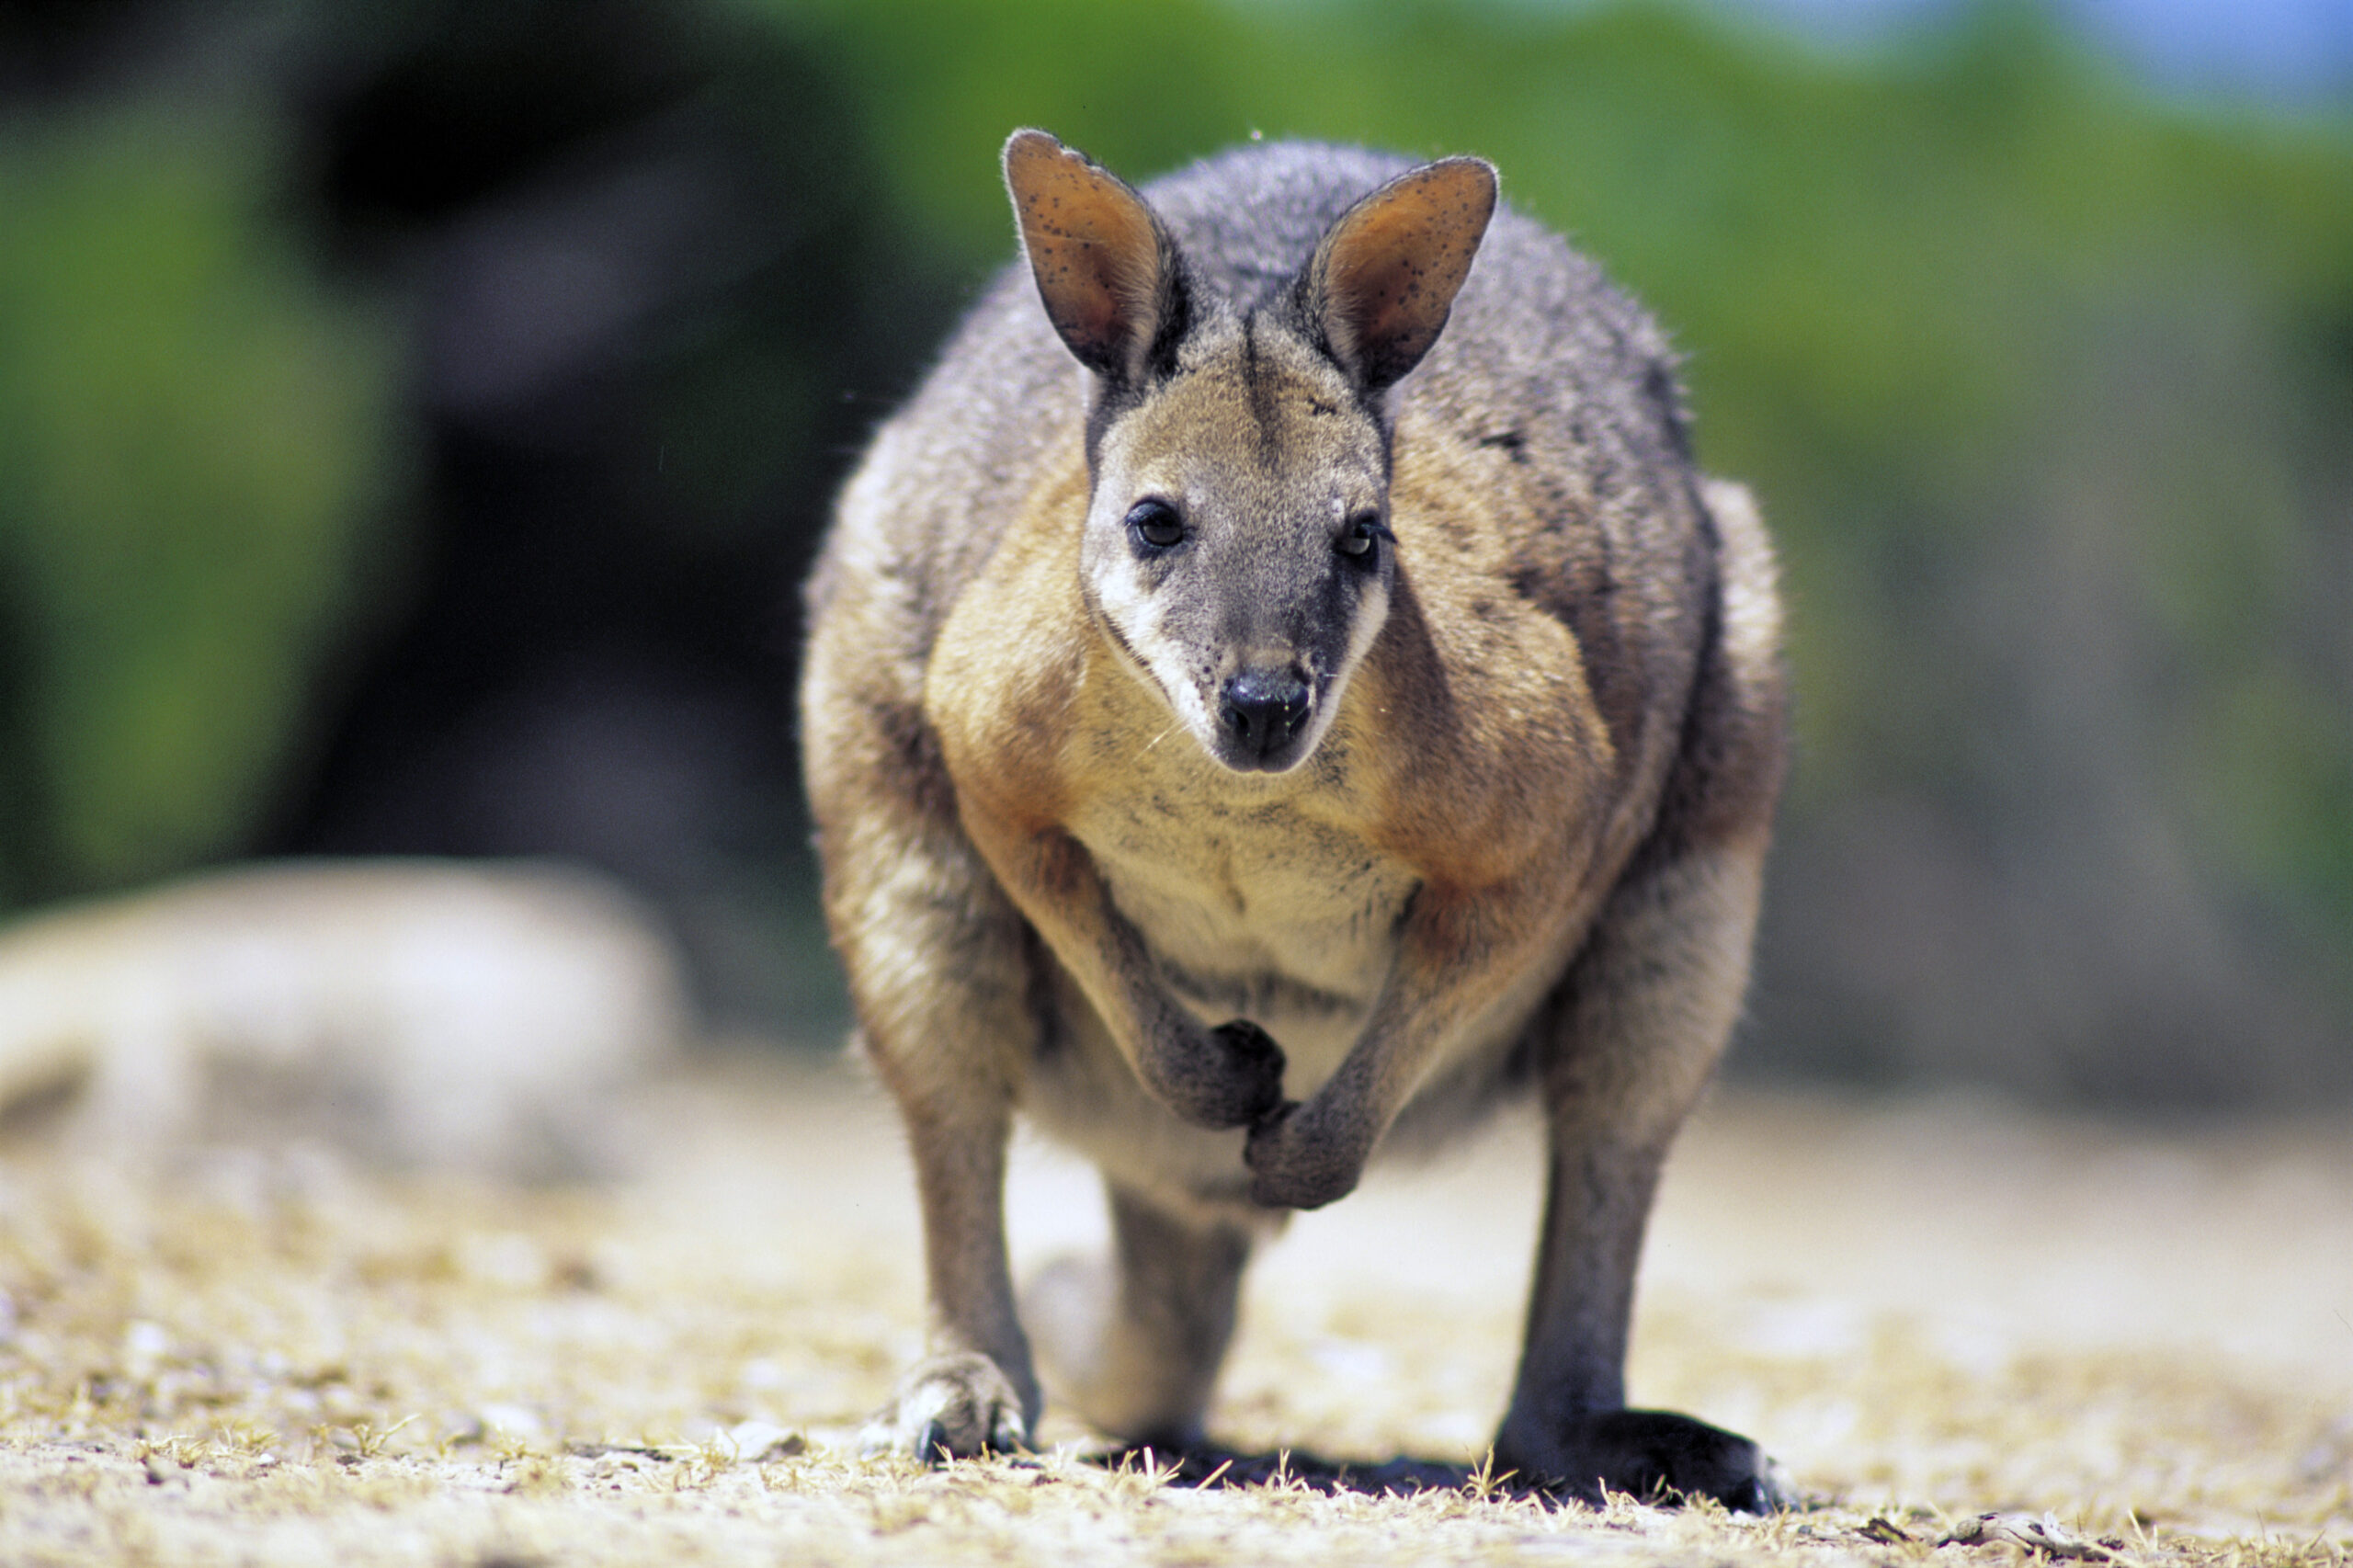 The wallaby that drinks seawater